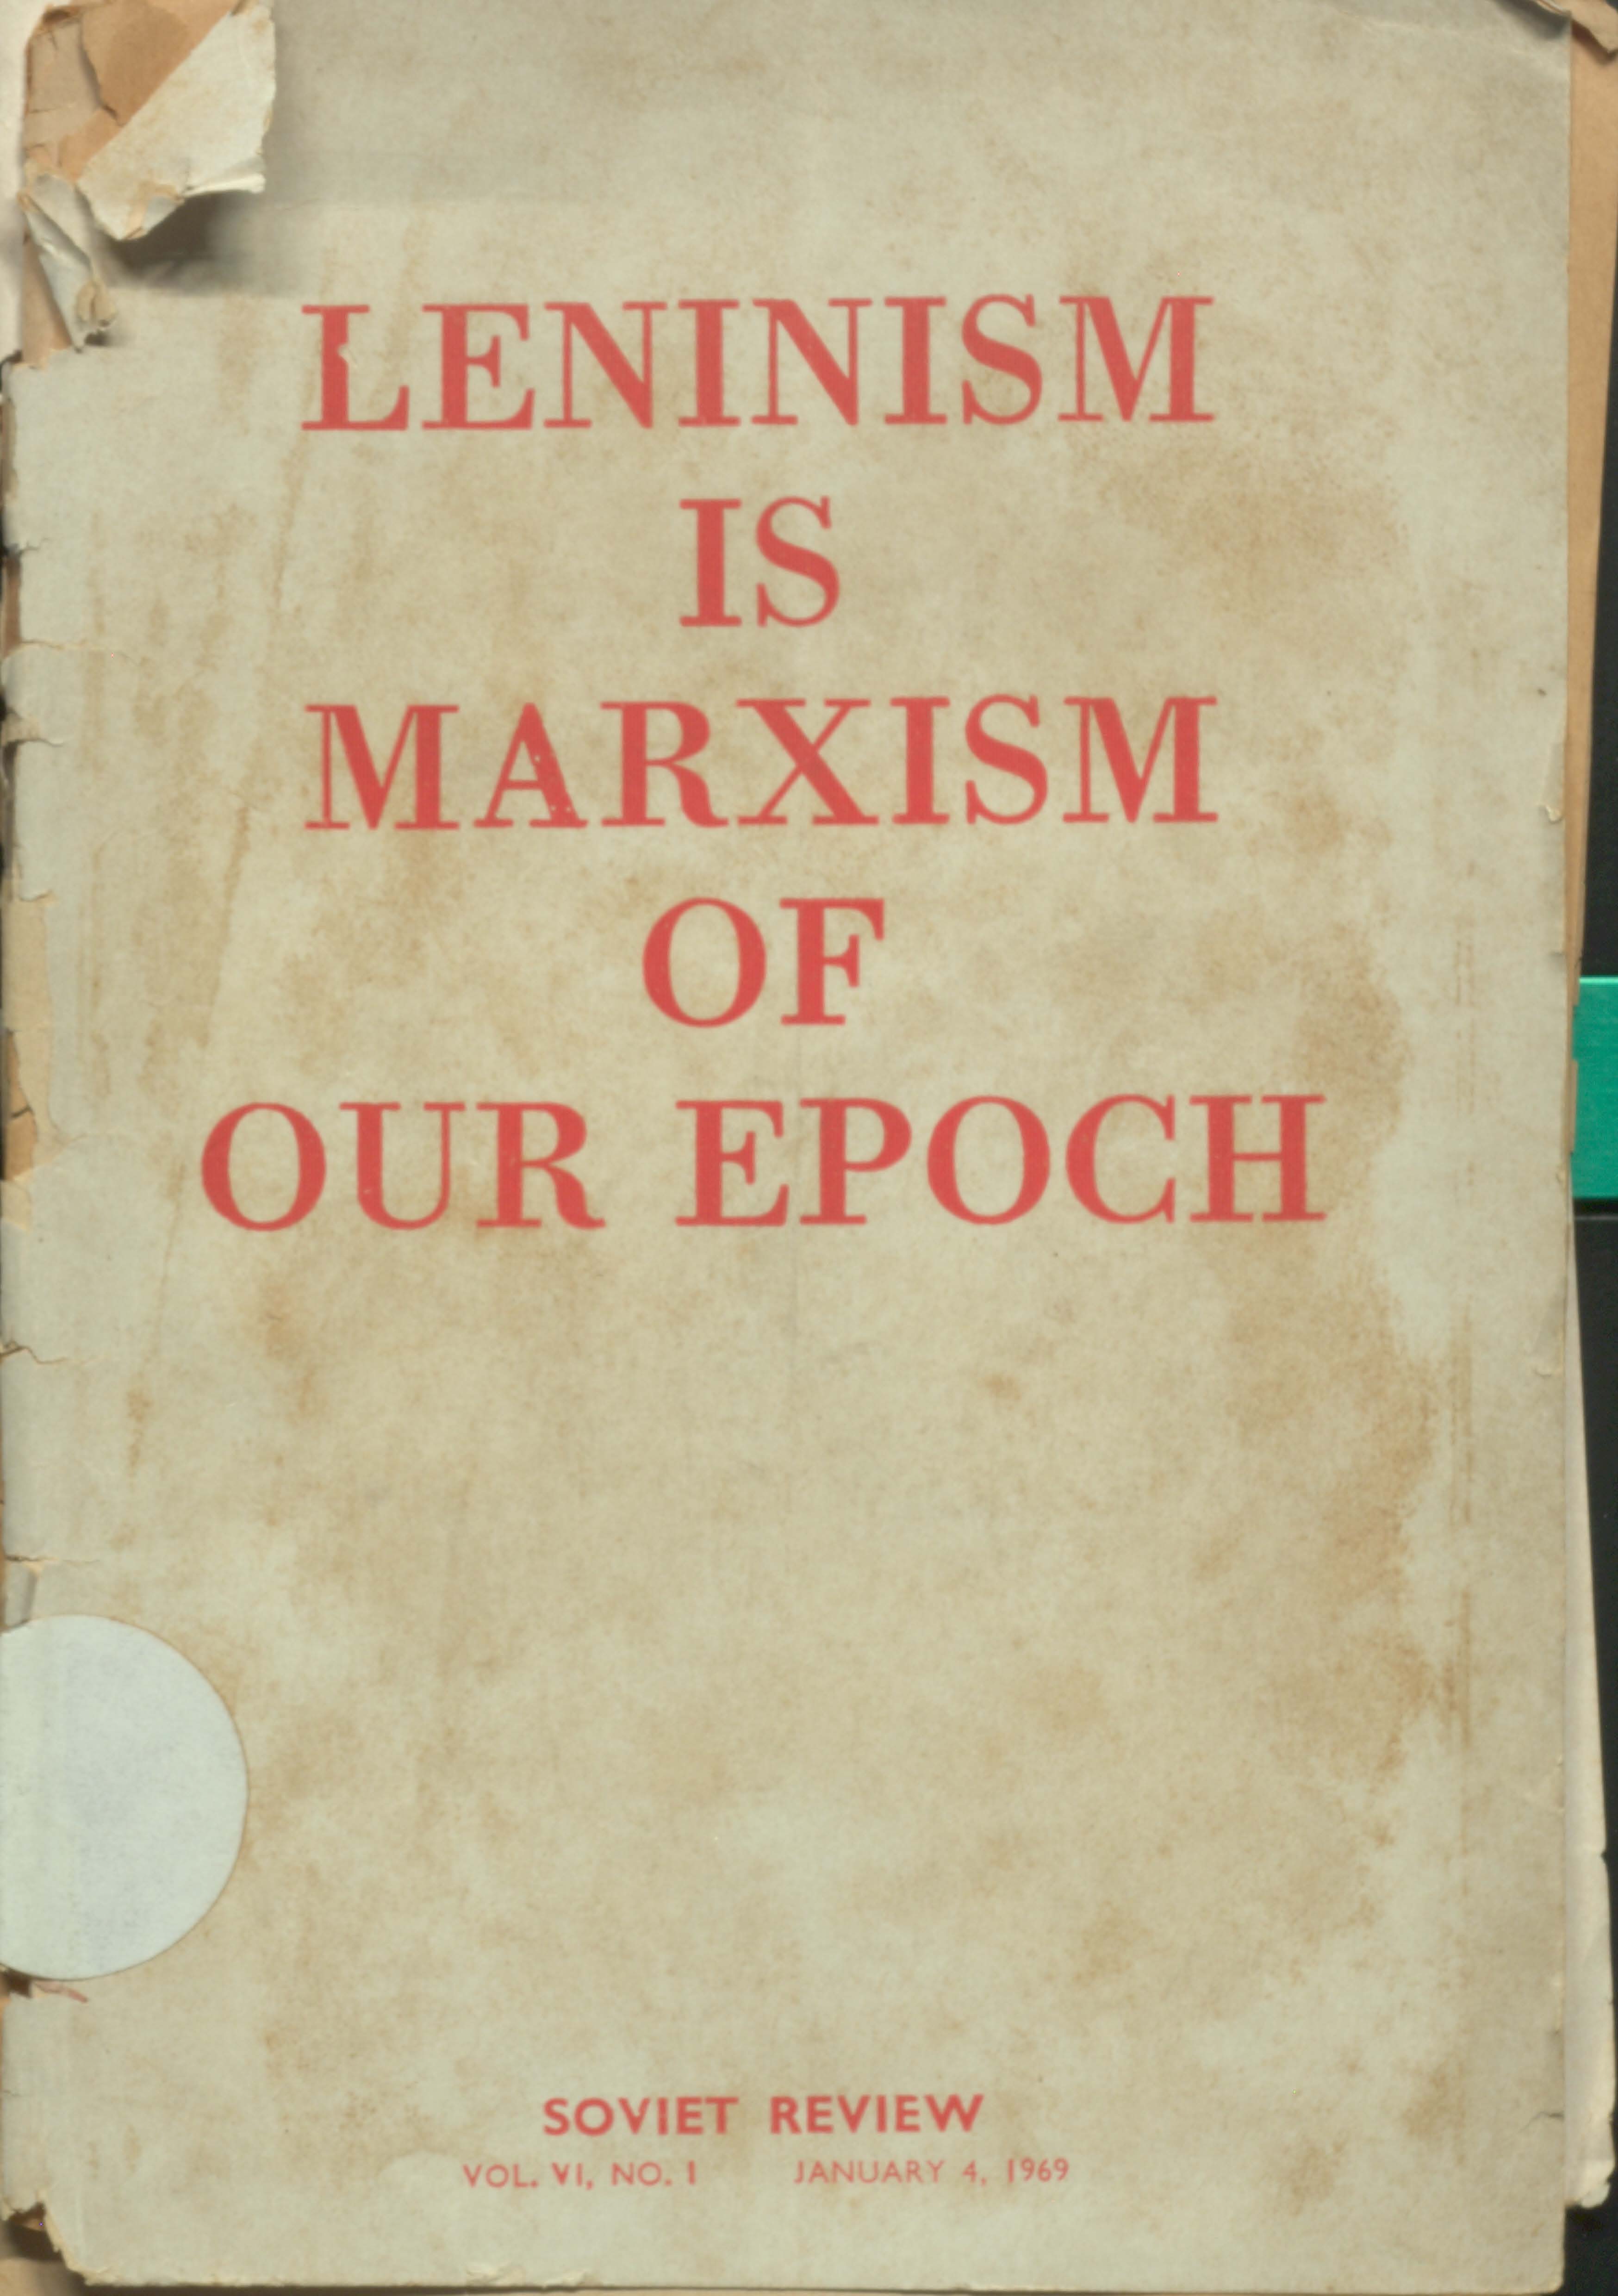 Leninism is marxism of our epoch (Vol-VI) January 4, 1969